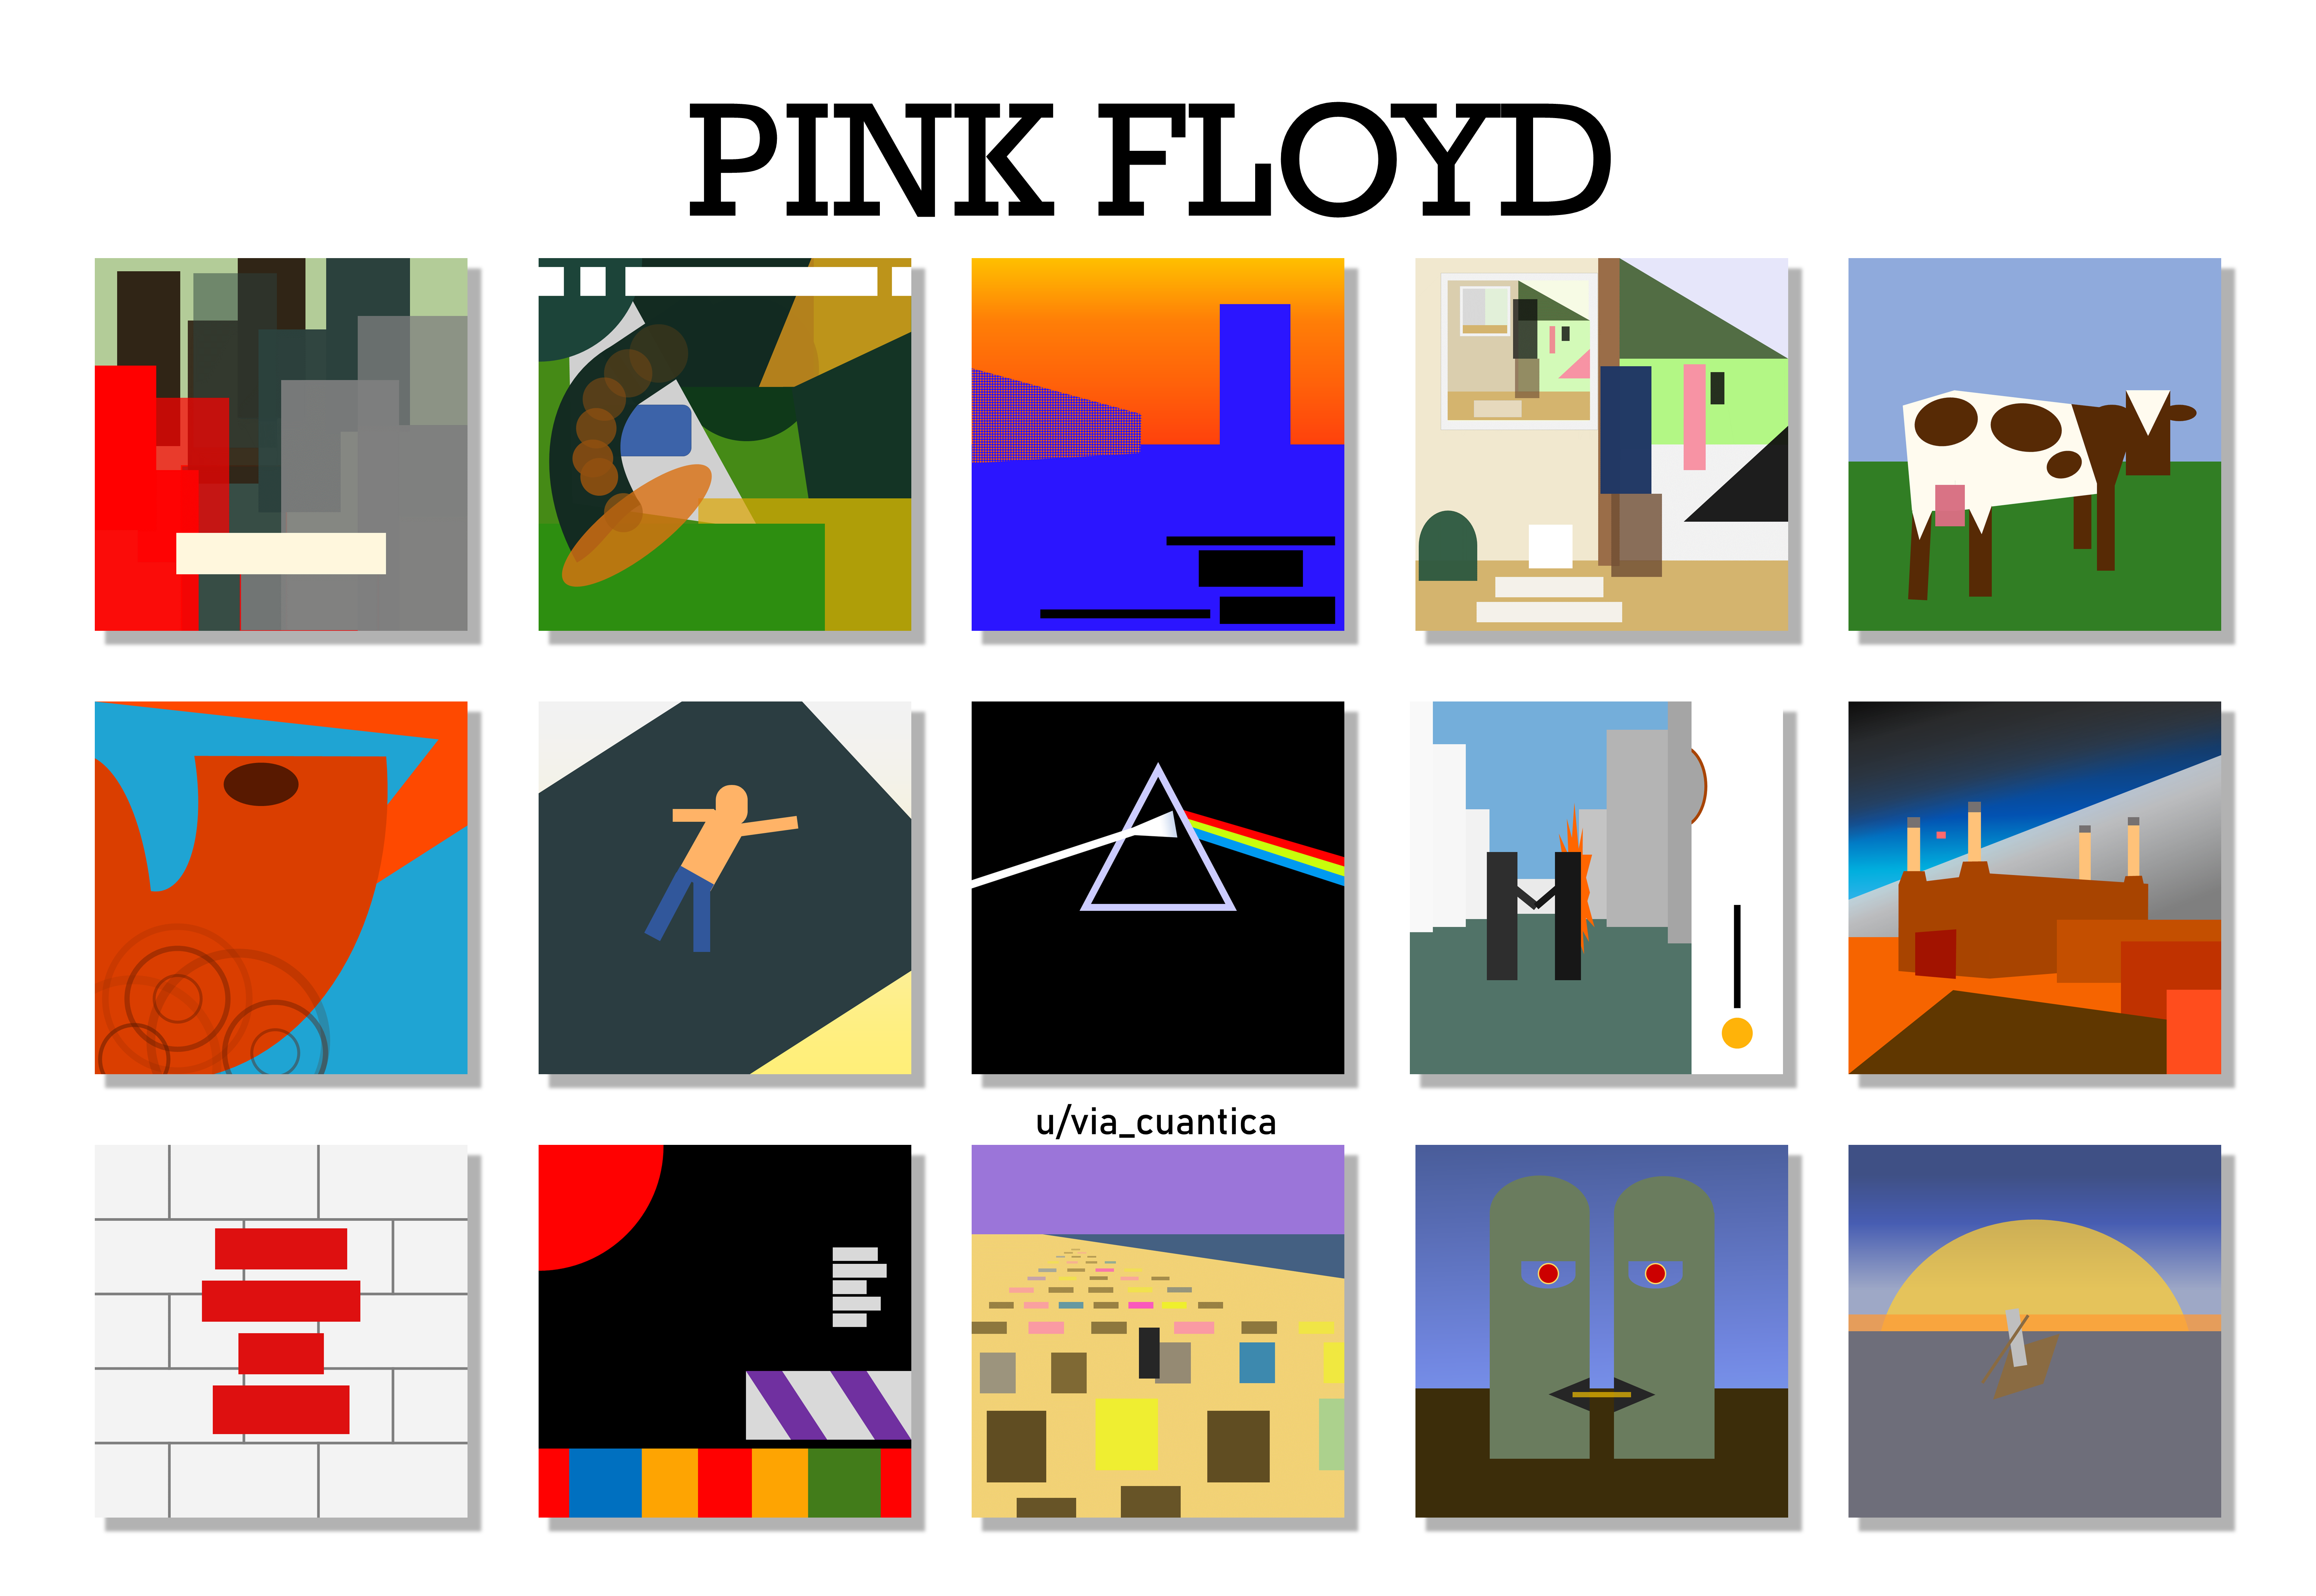 I made a simplified version of all Pink Floyd album covers using geometric figures